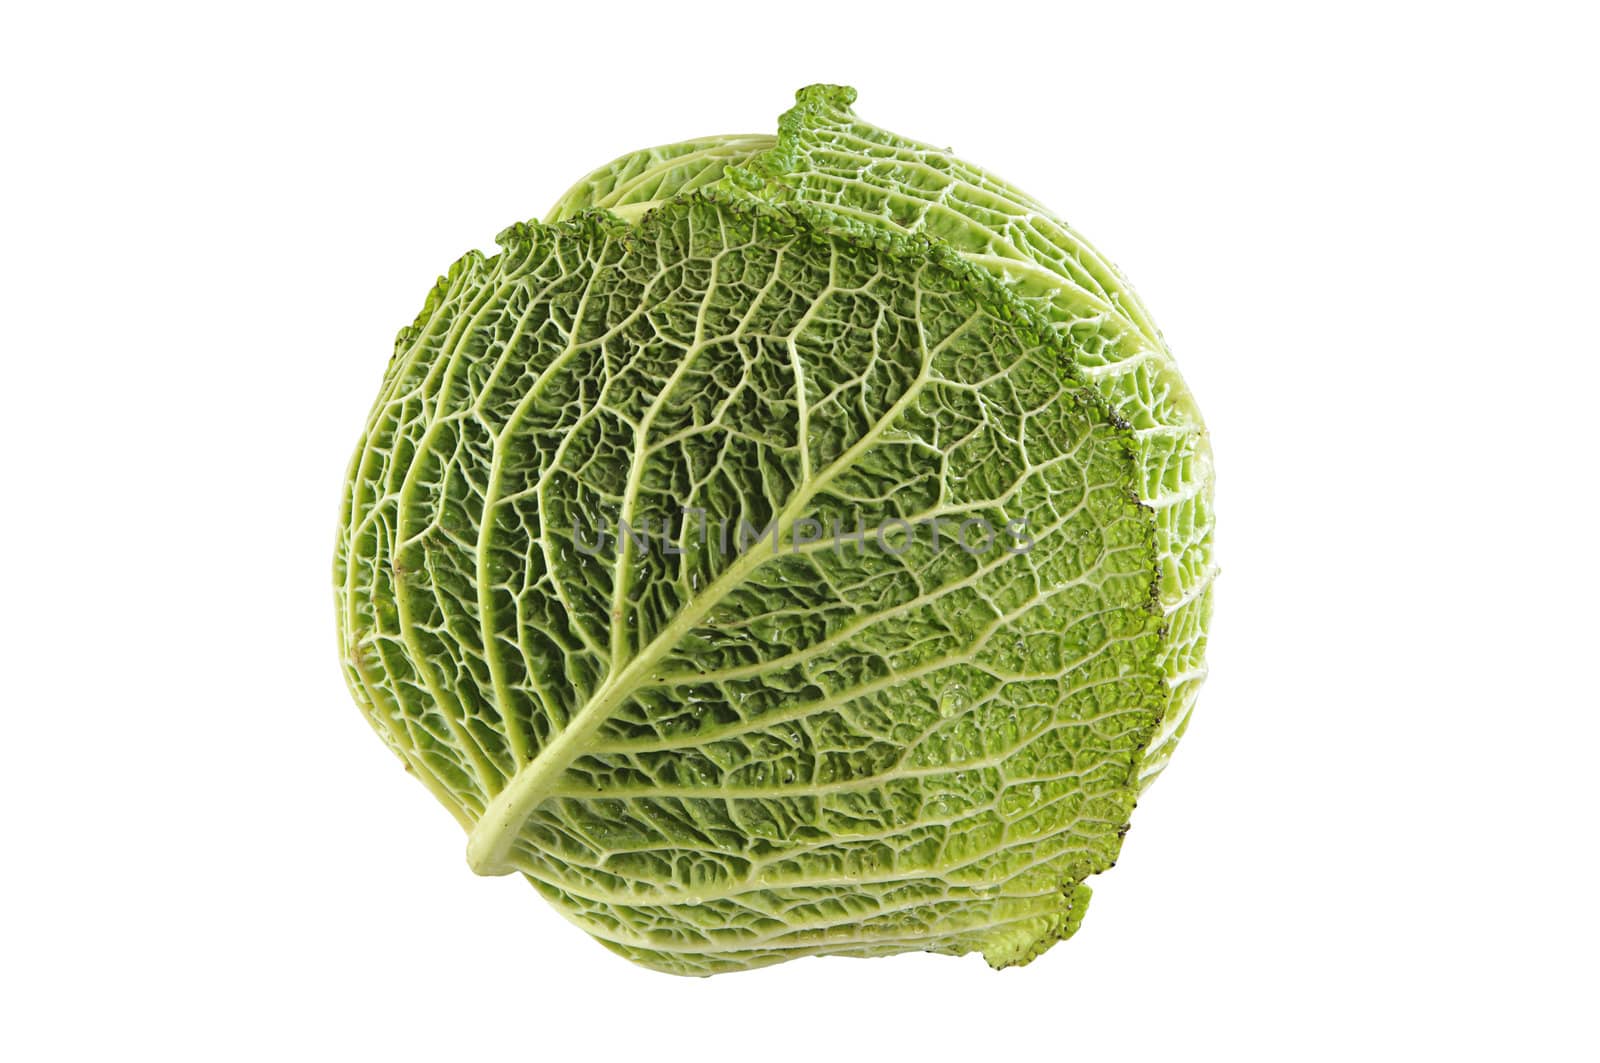 A head of cabbage isolated on a white background